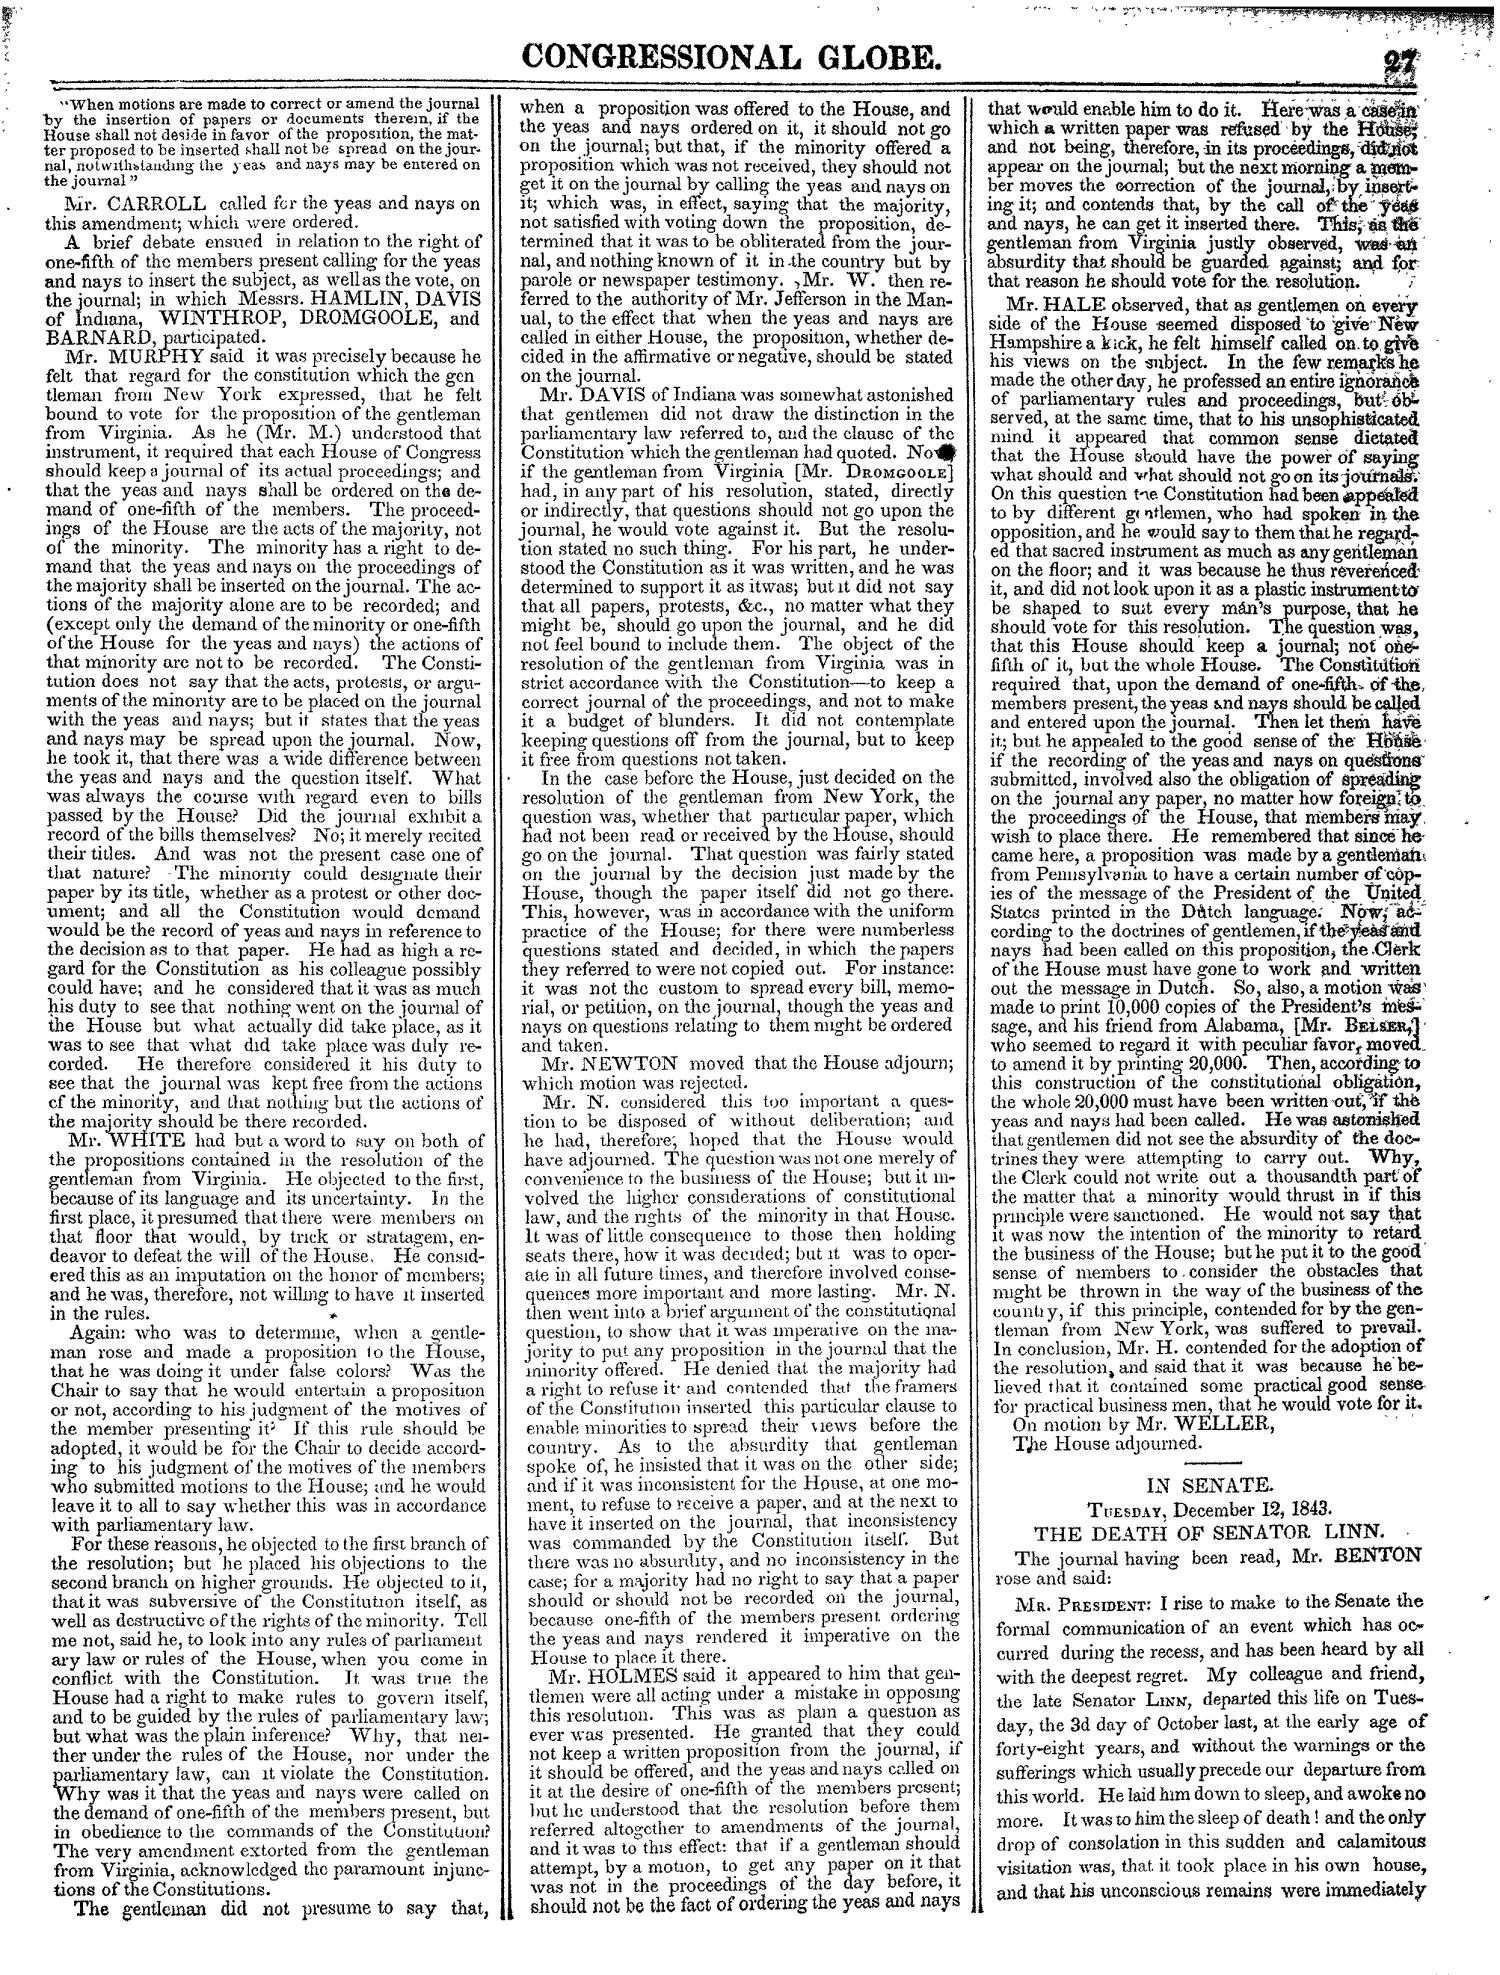 The Congressional Globe, Volume 13, Part 1: Twenty-Eighth Congress, First Session
                                                
                                                    27
                                                